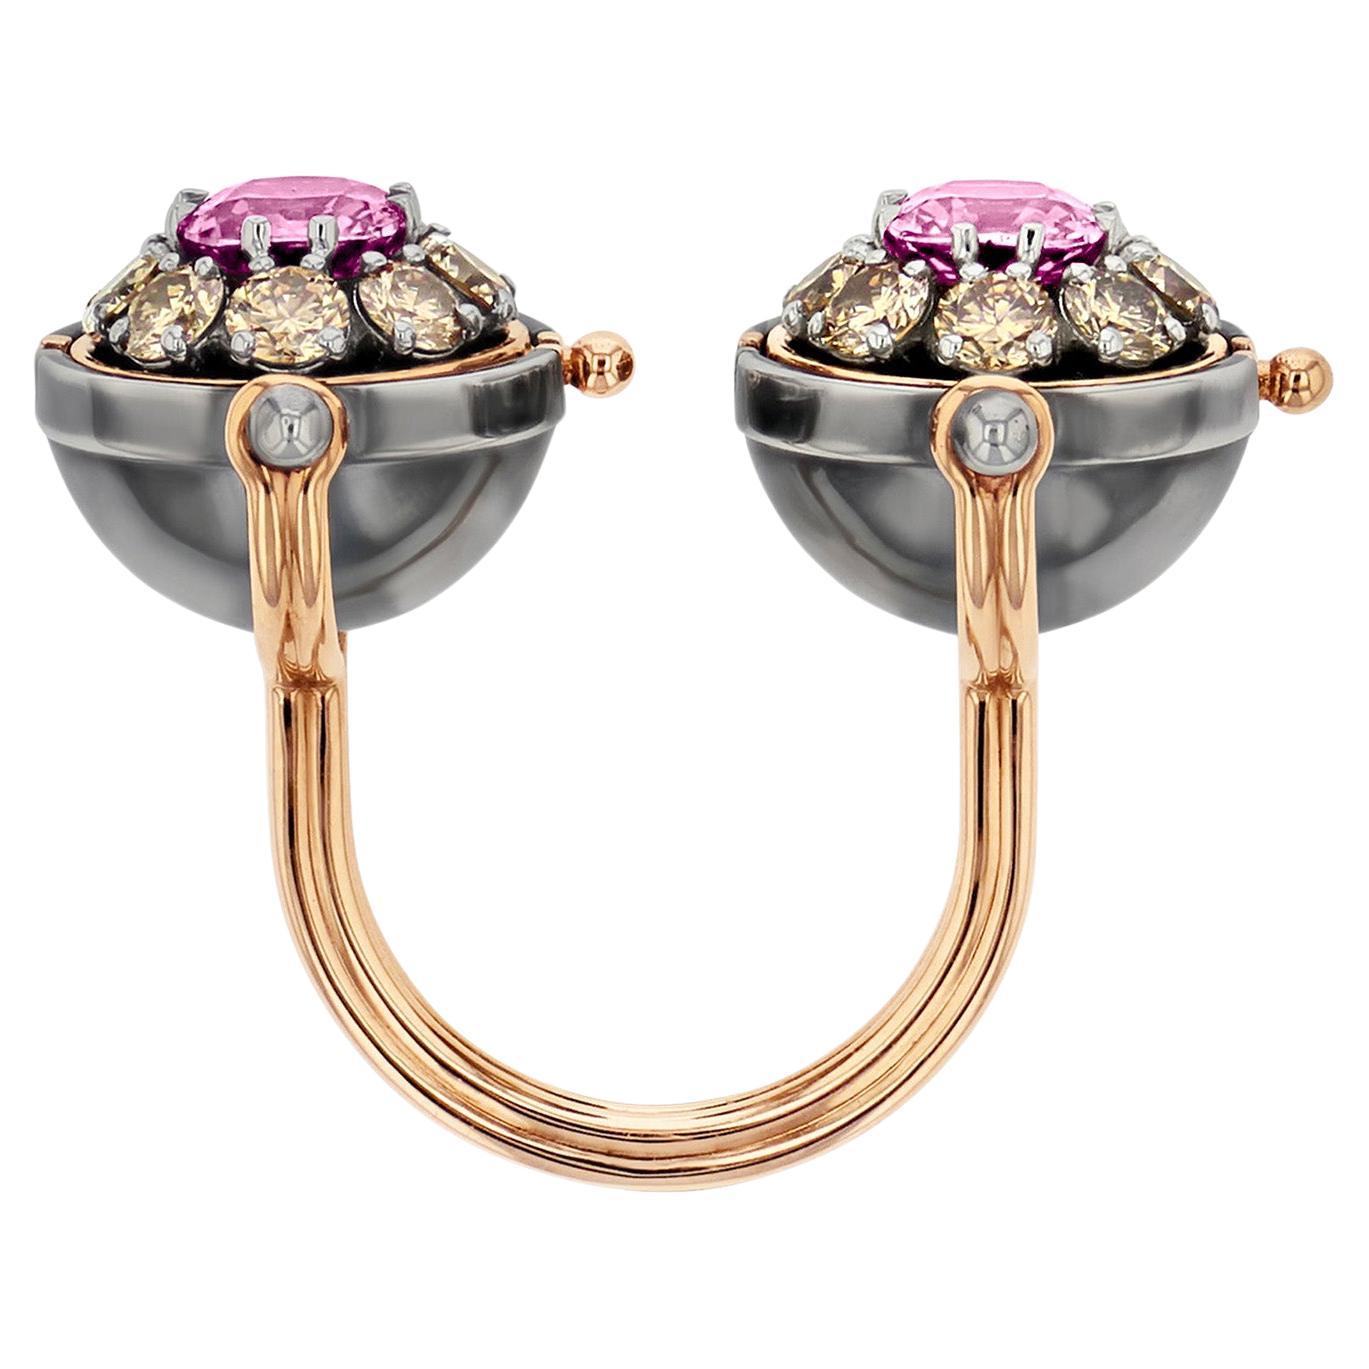 Pink Sapphire & Diamonds Sirius Toi&Moi Ring in 18k Rose Gold by Elie Top For Sale